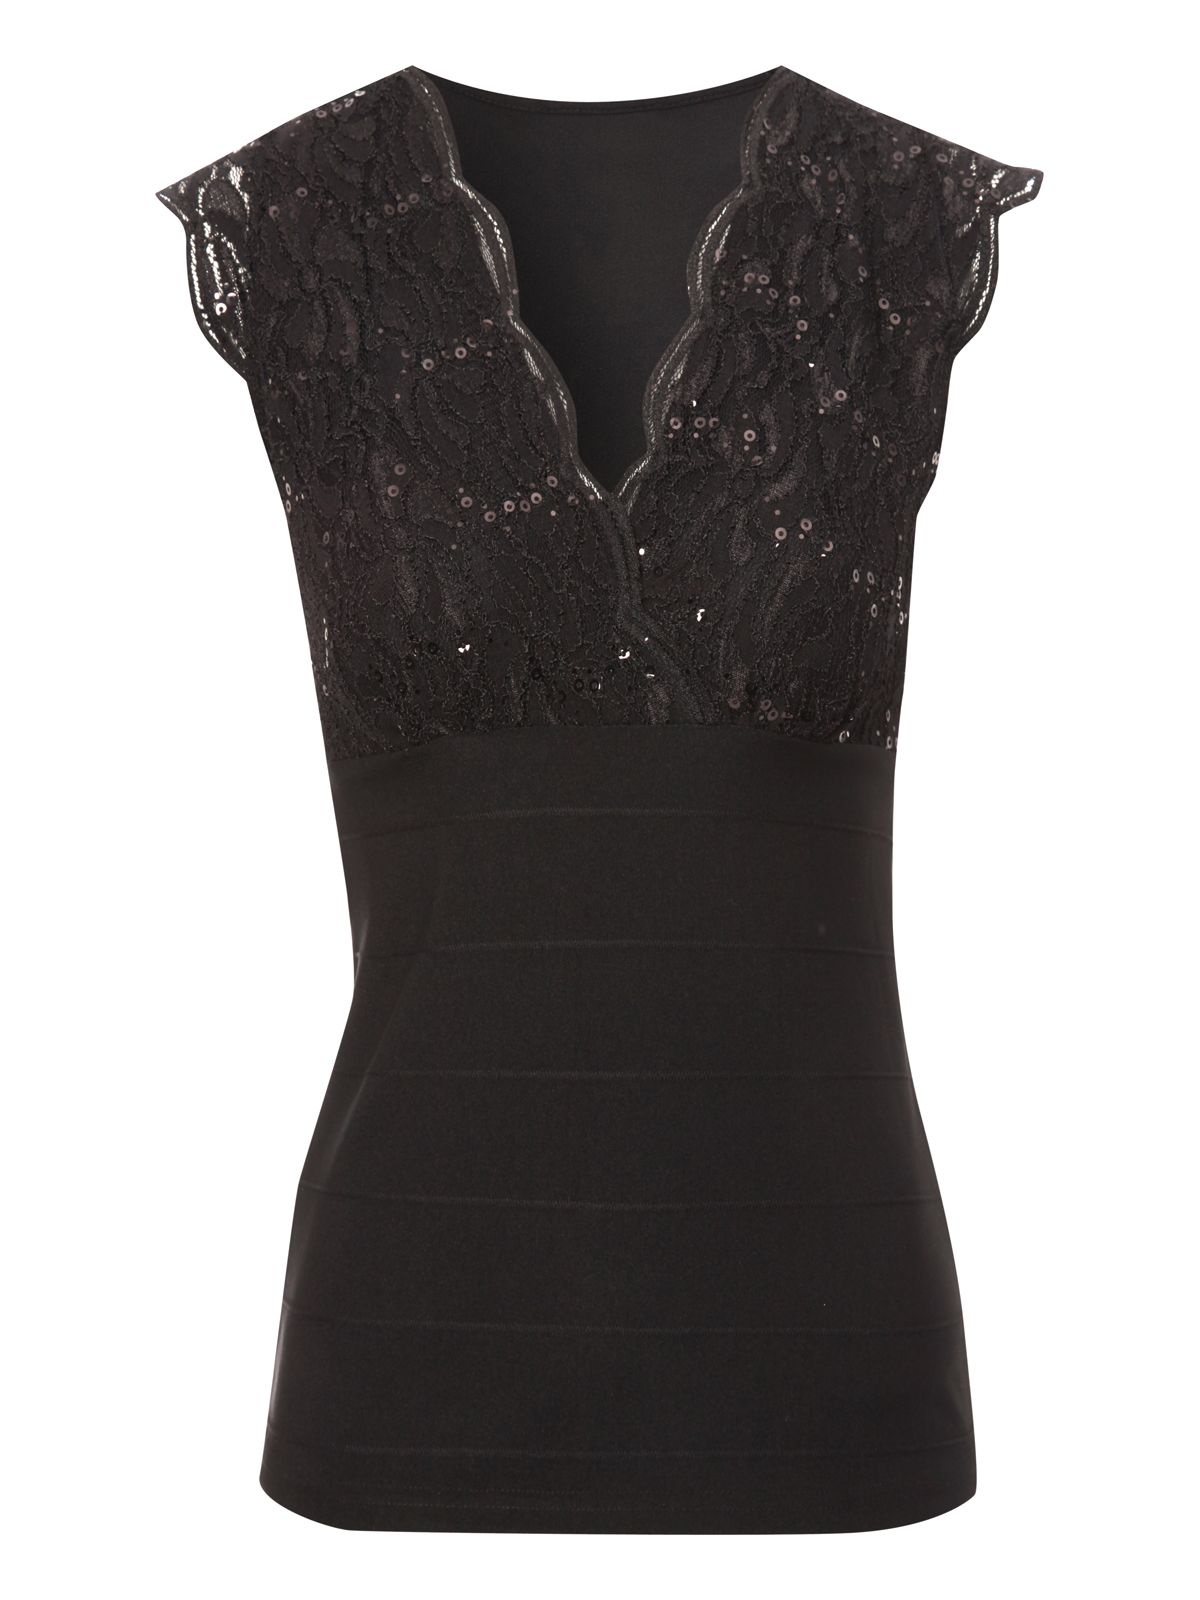 Jane Norman Lace Bandage Top in Black | Lyst